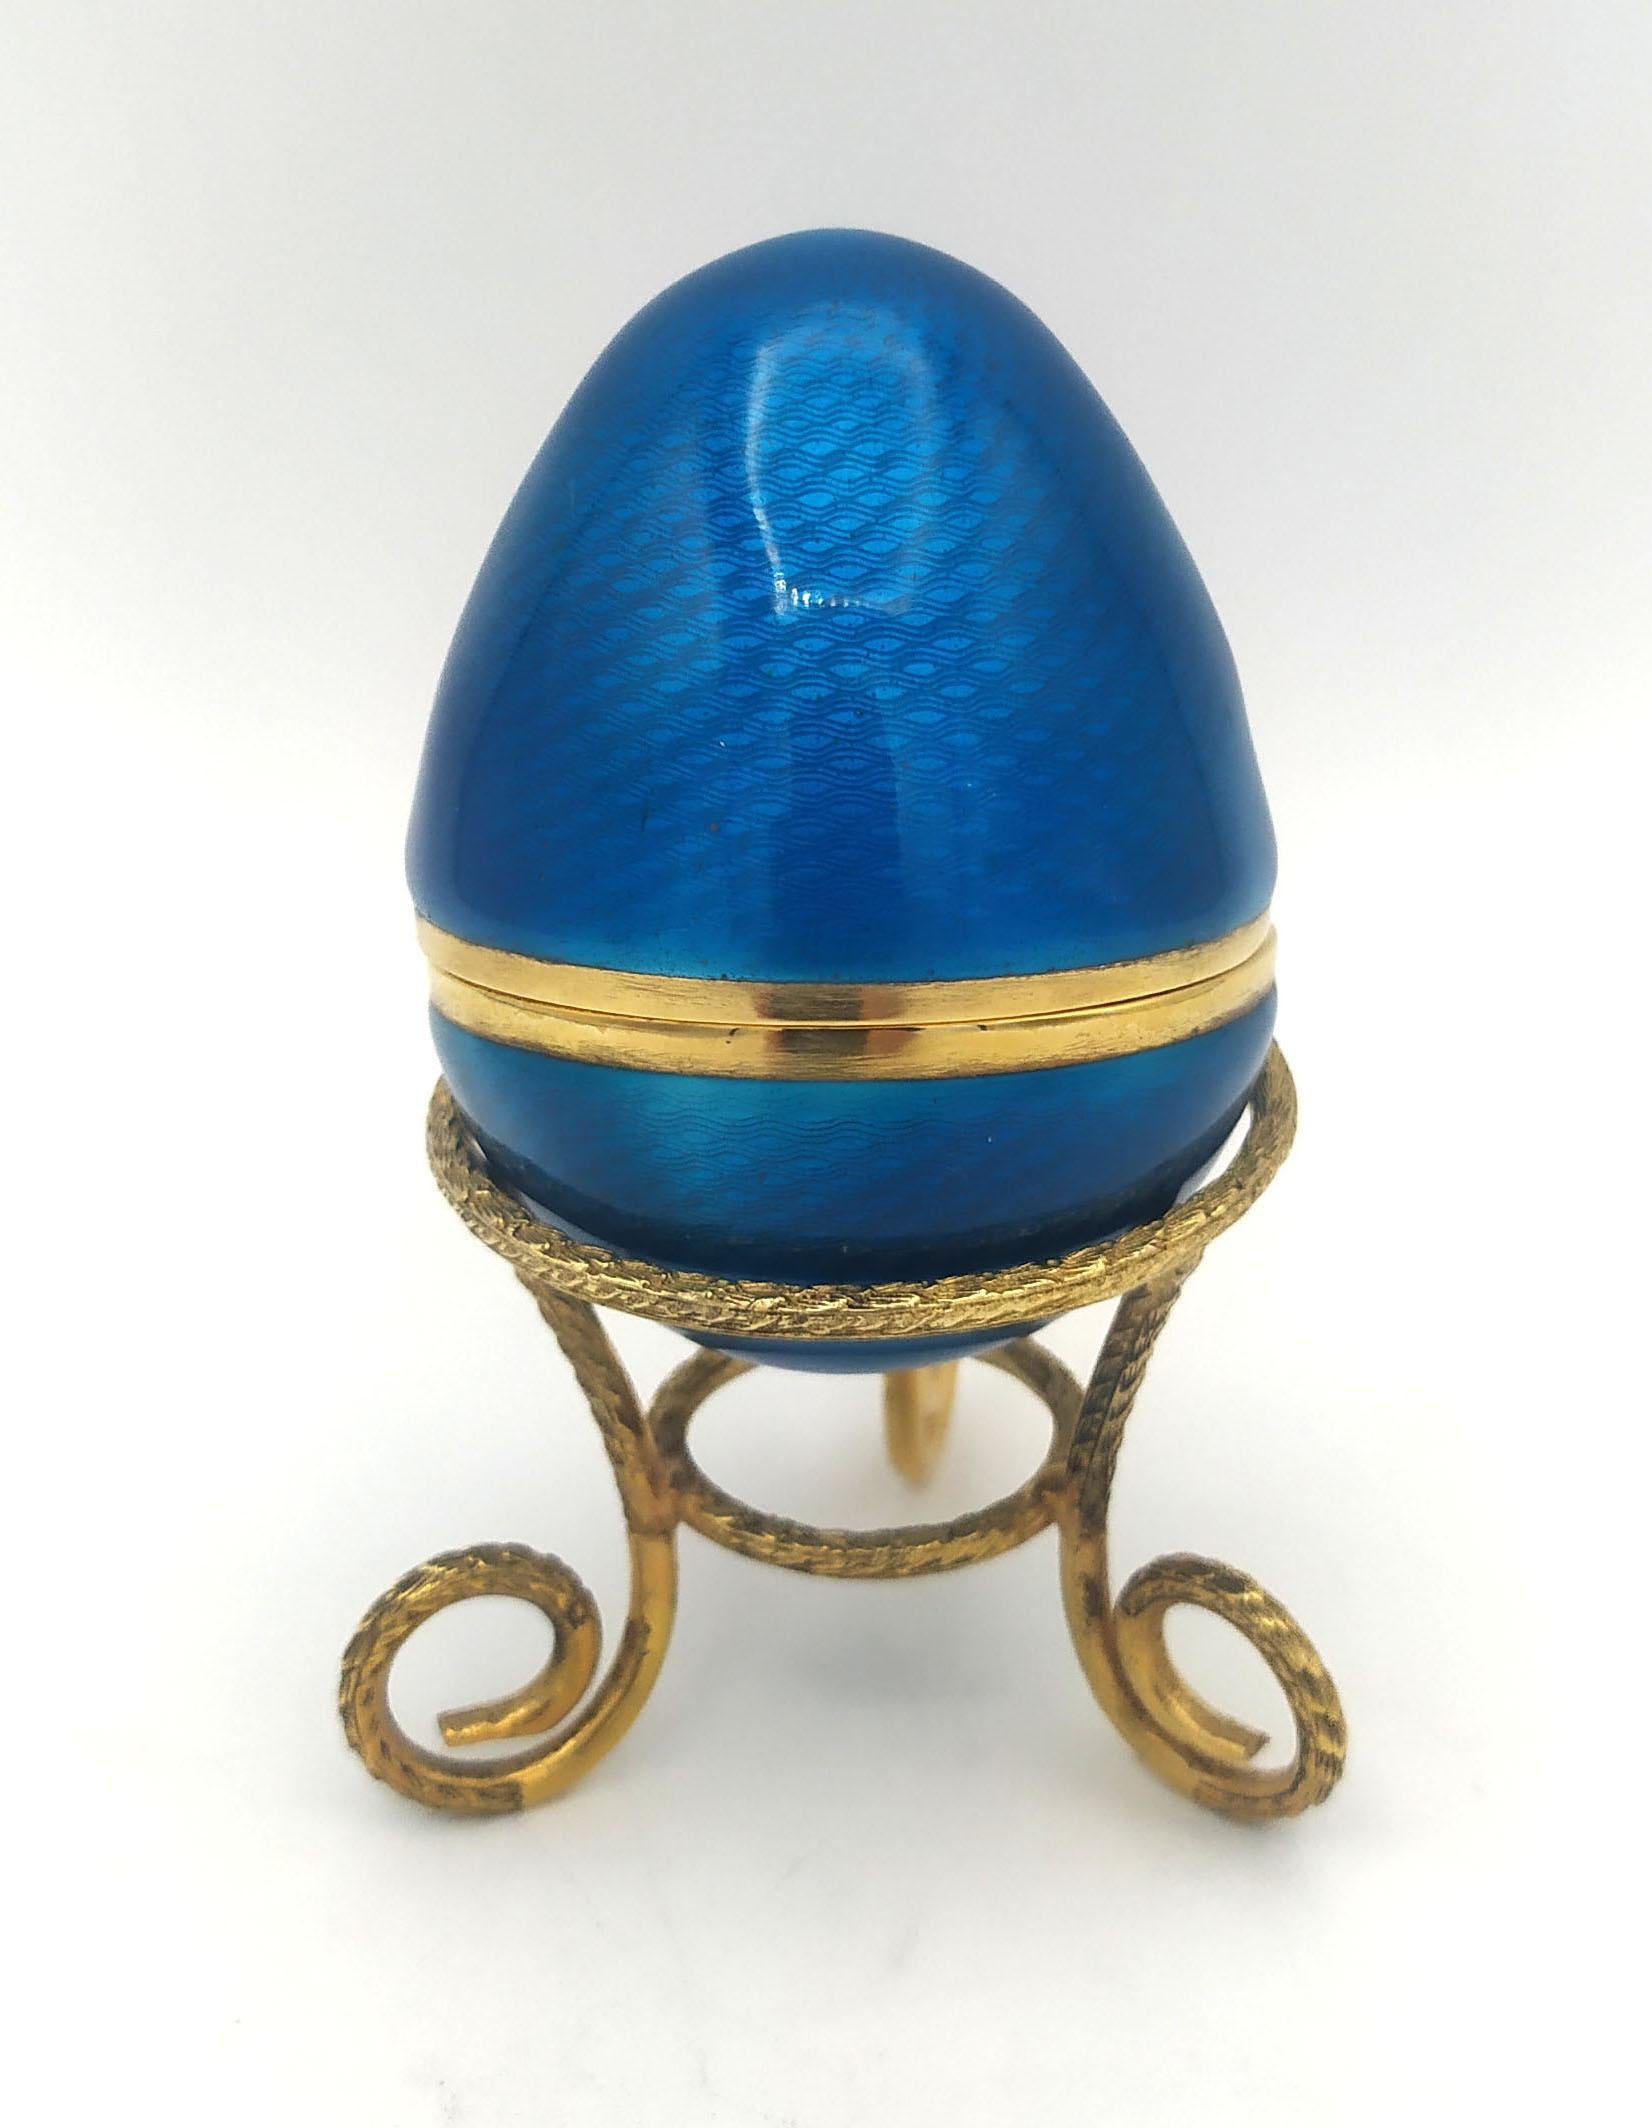 
Egg Navy Blue enamel is in 925/1000 sterling silver.
Egg Navy Blue enamel has fired enamels on guilloché has fired enamels on guilloché and design engraved by hand.
Egg Navy Blue enamel is Russian Empire style inspired by Carl Fabergè eggs late